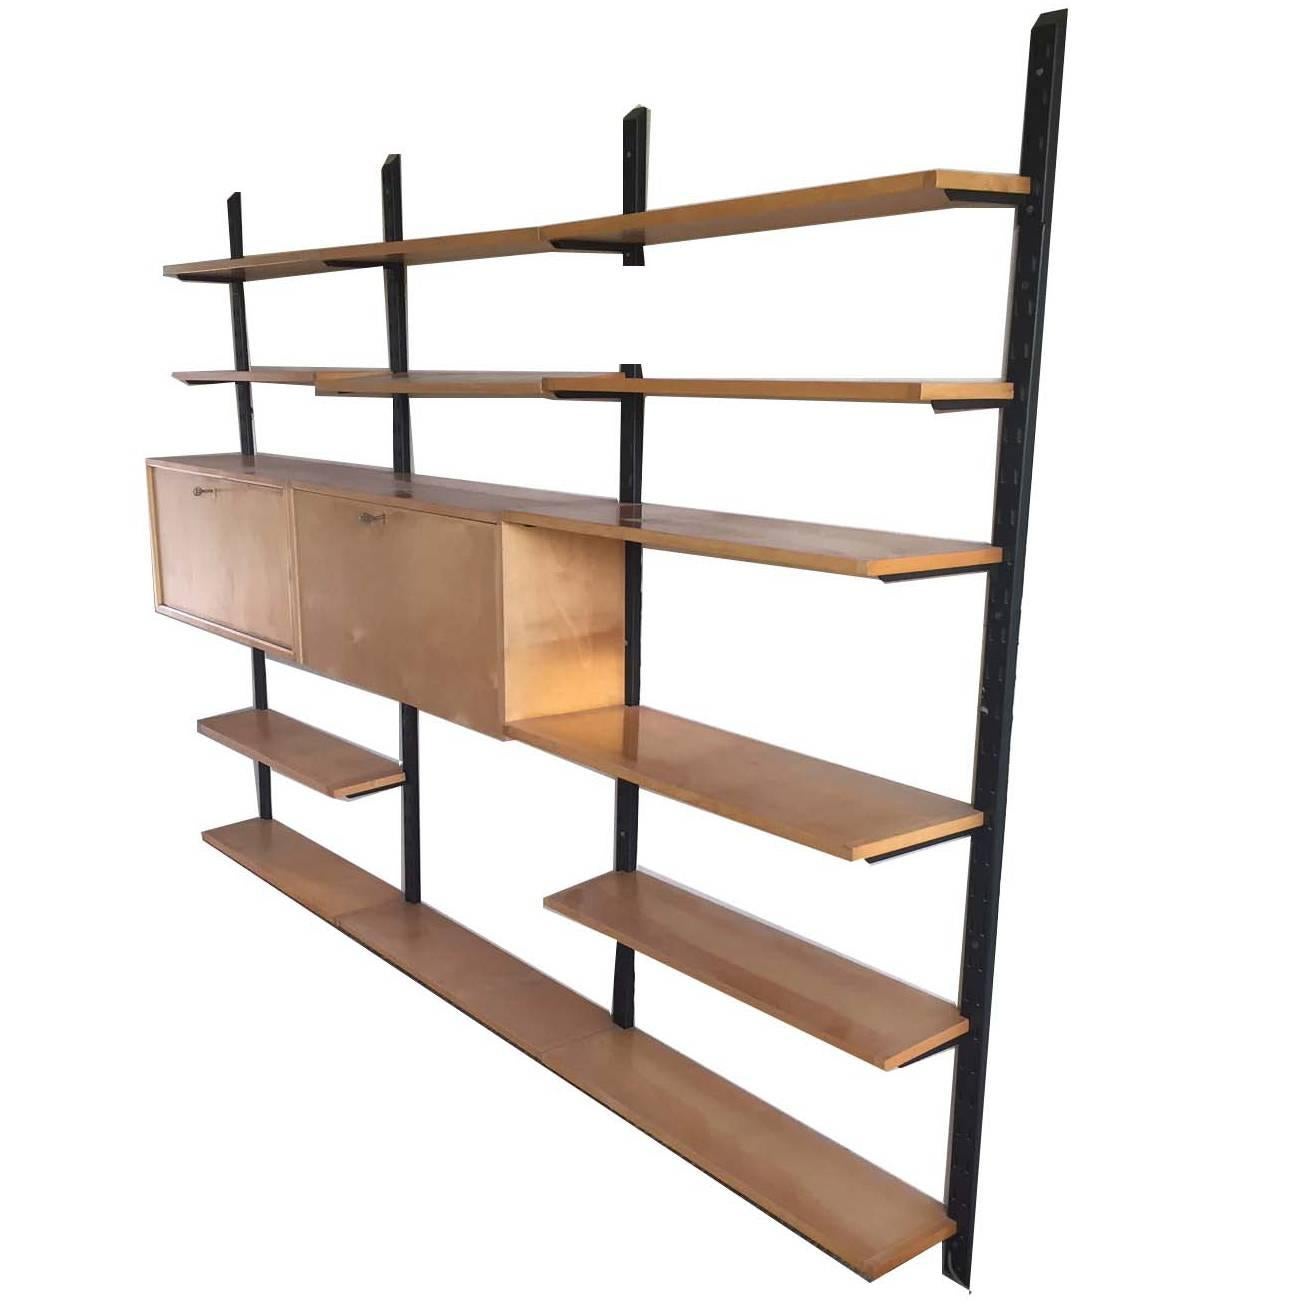 Cees Braakman for Pastoe “Birch Series” Style Wall System, Dutch, 1950s For Sale